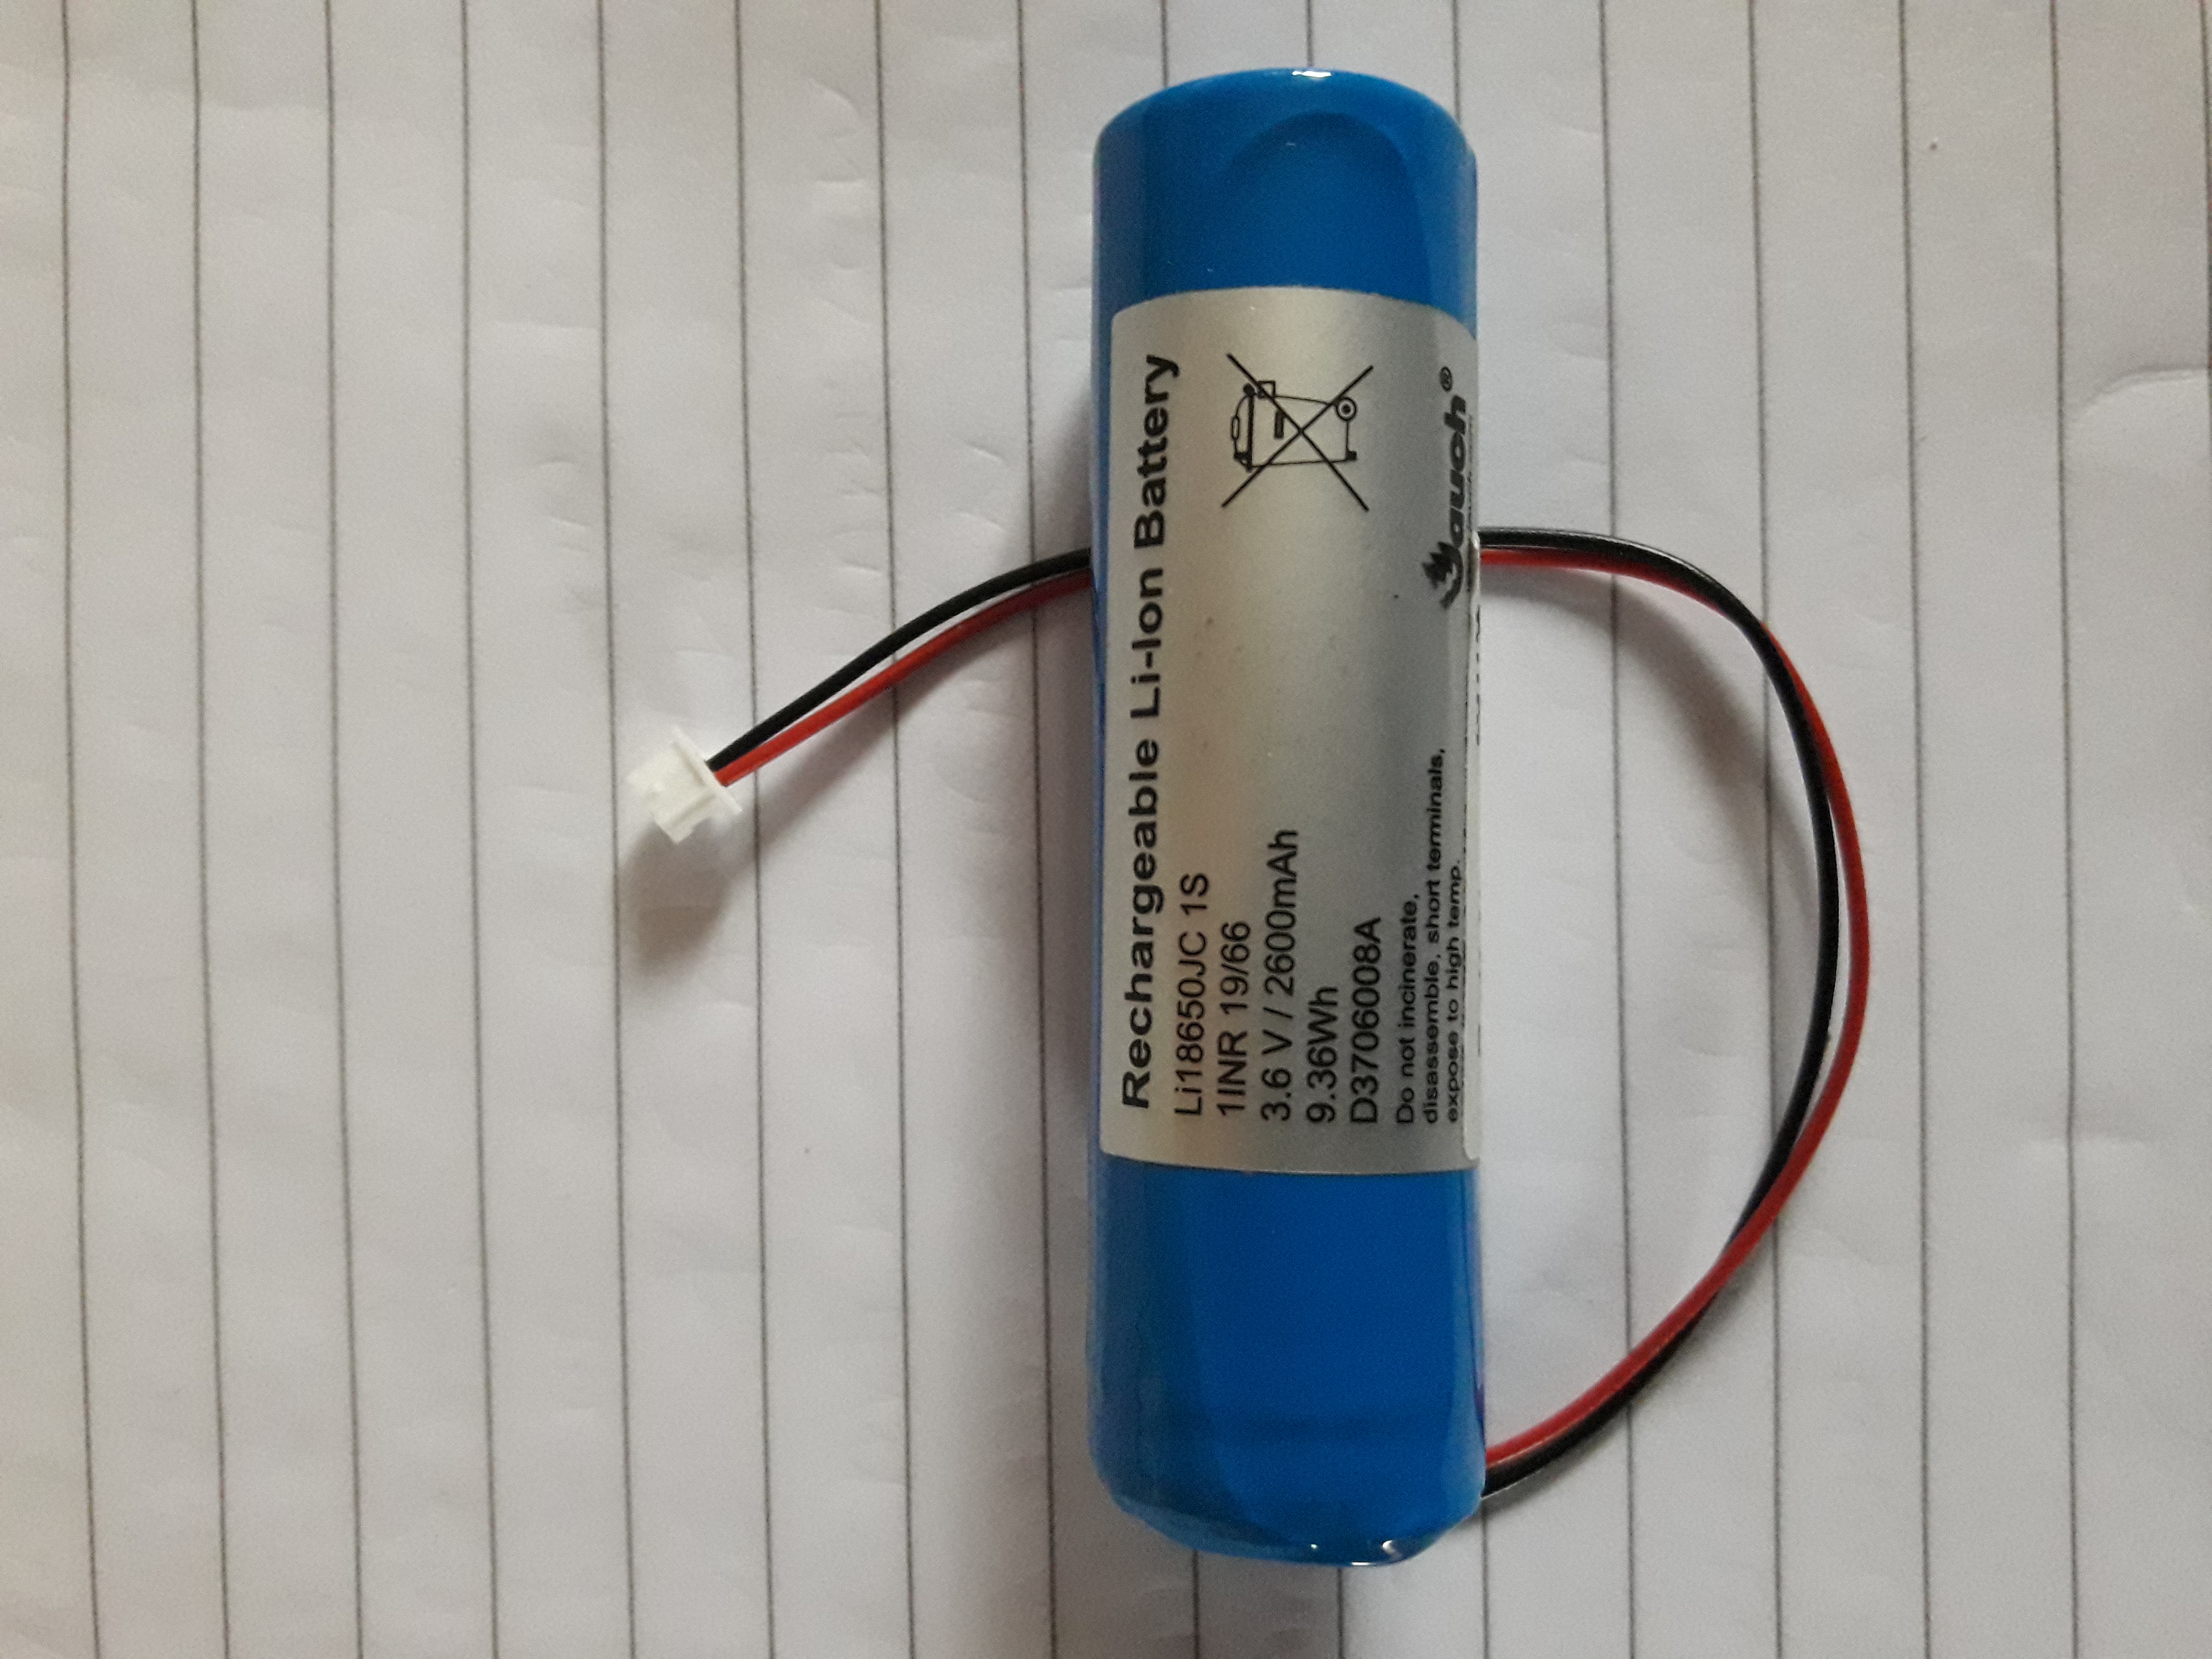 What to do with 1 or more 18650 Li-ion battery?